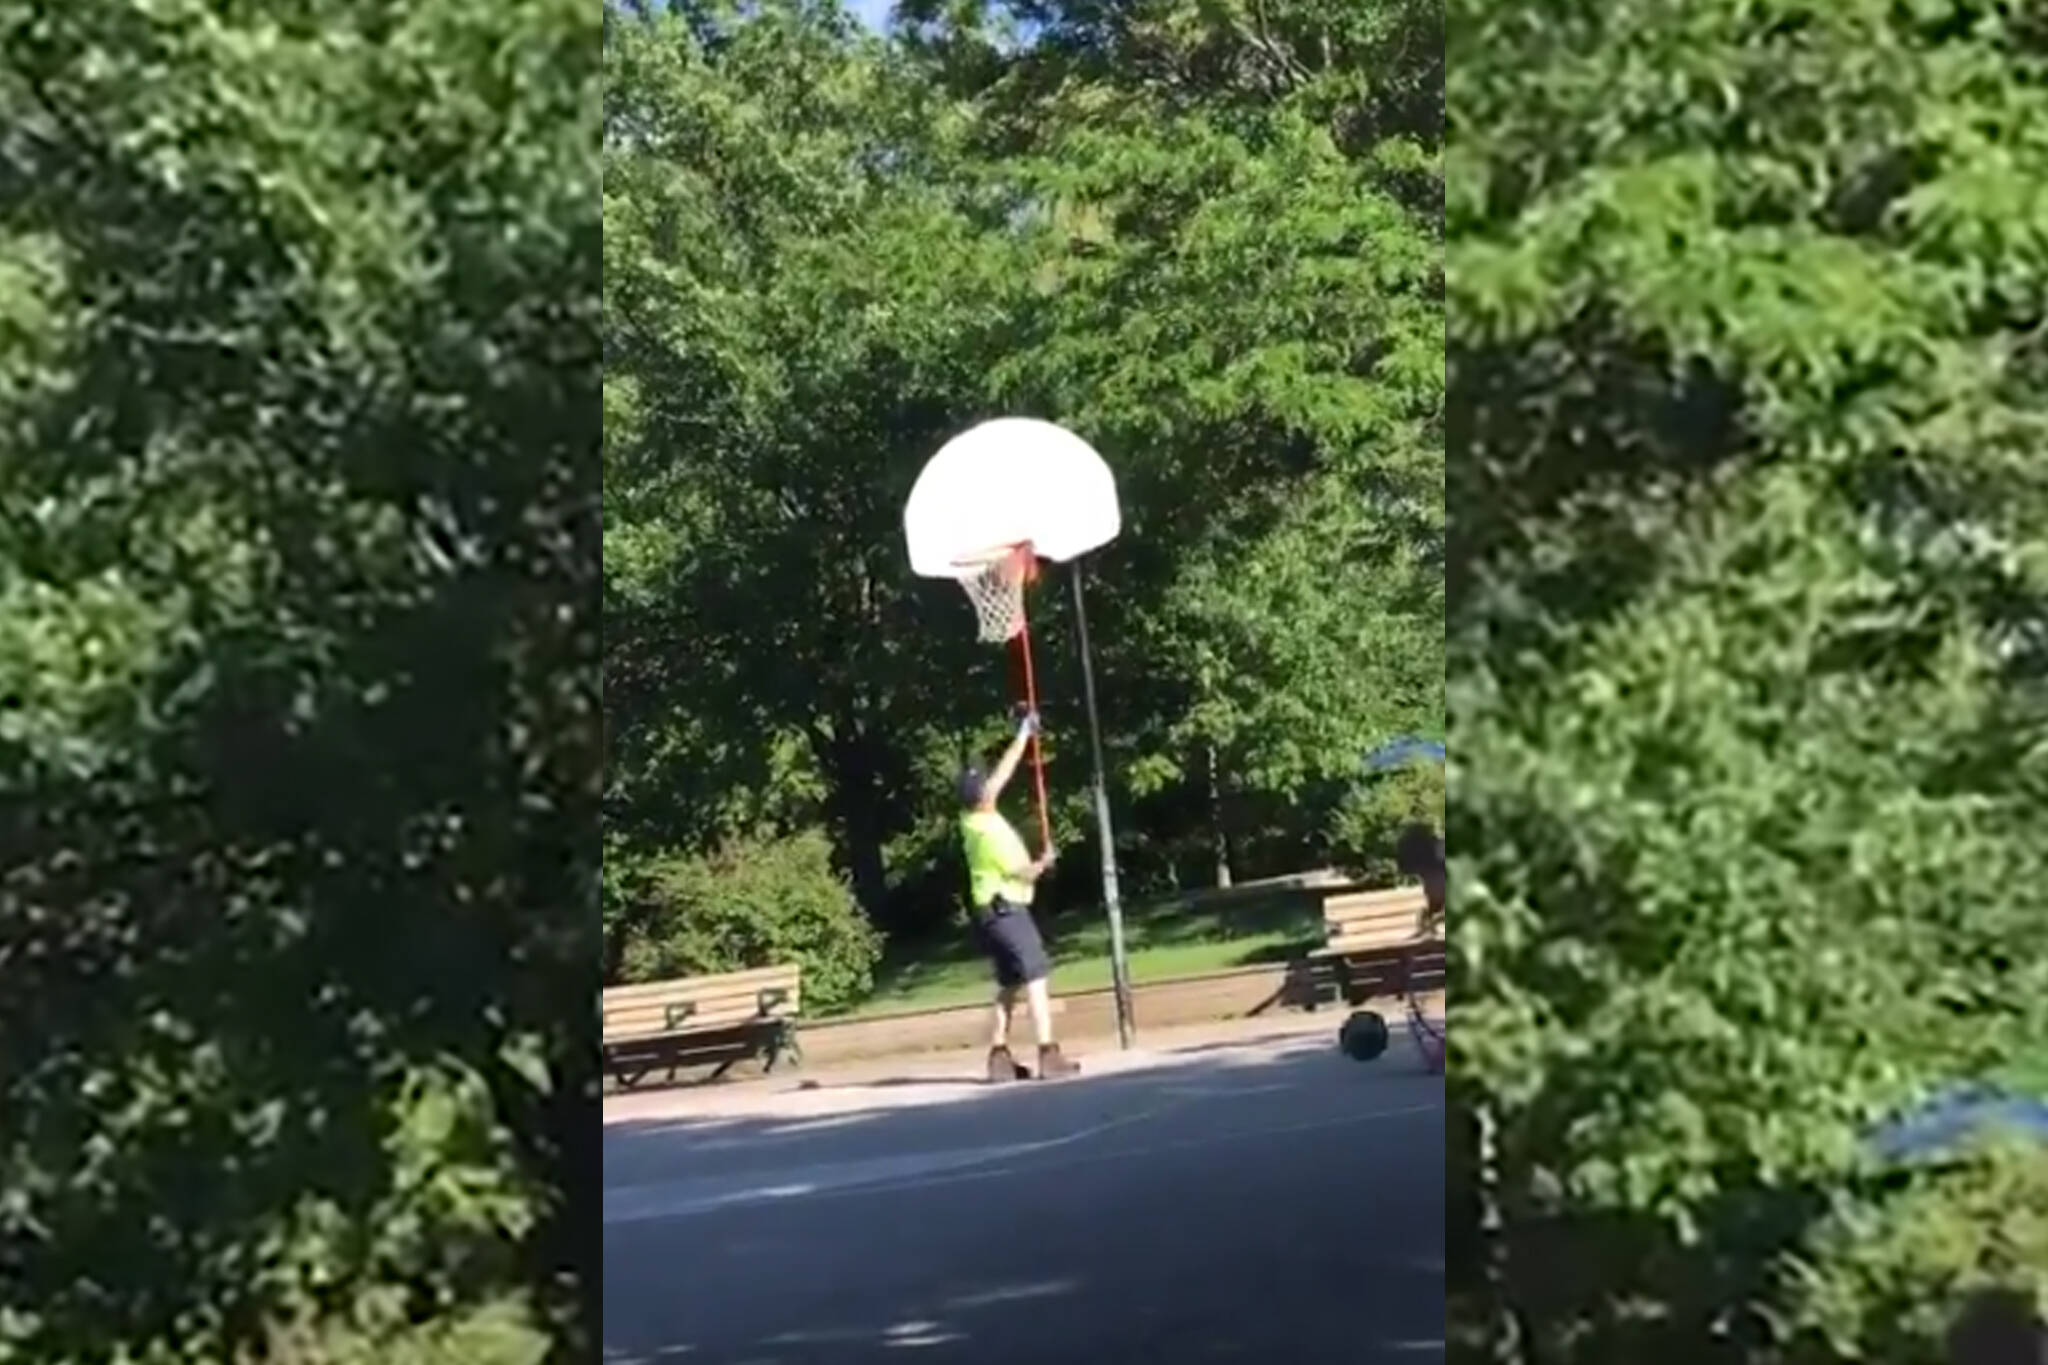 Toronto will stop removing basketball nets in local parks after public